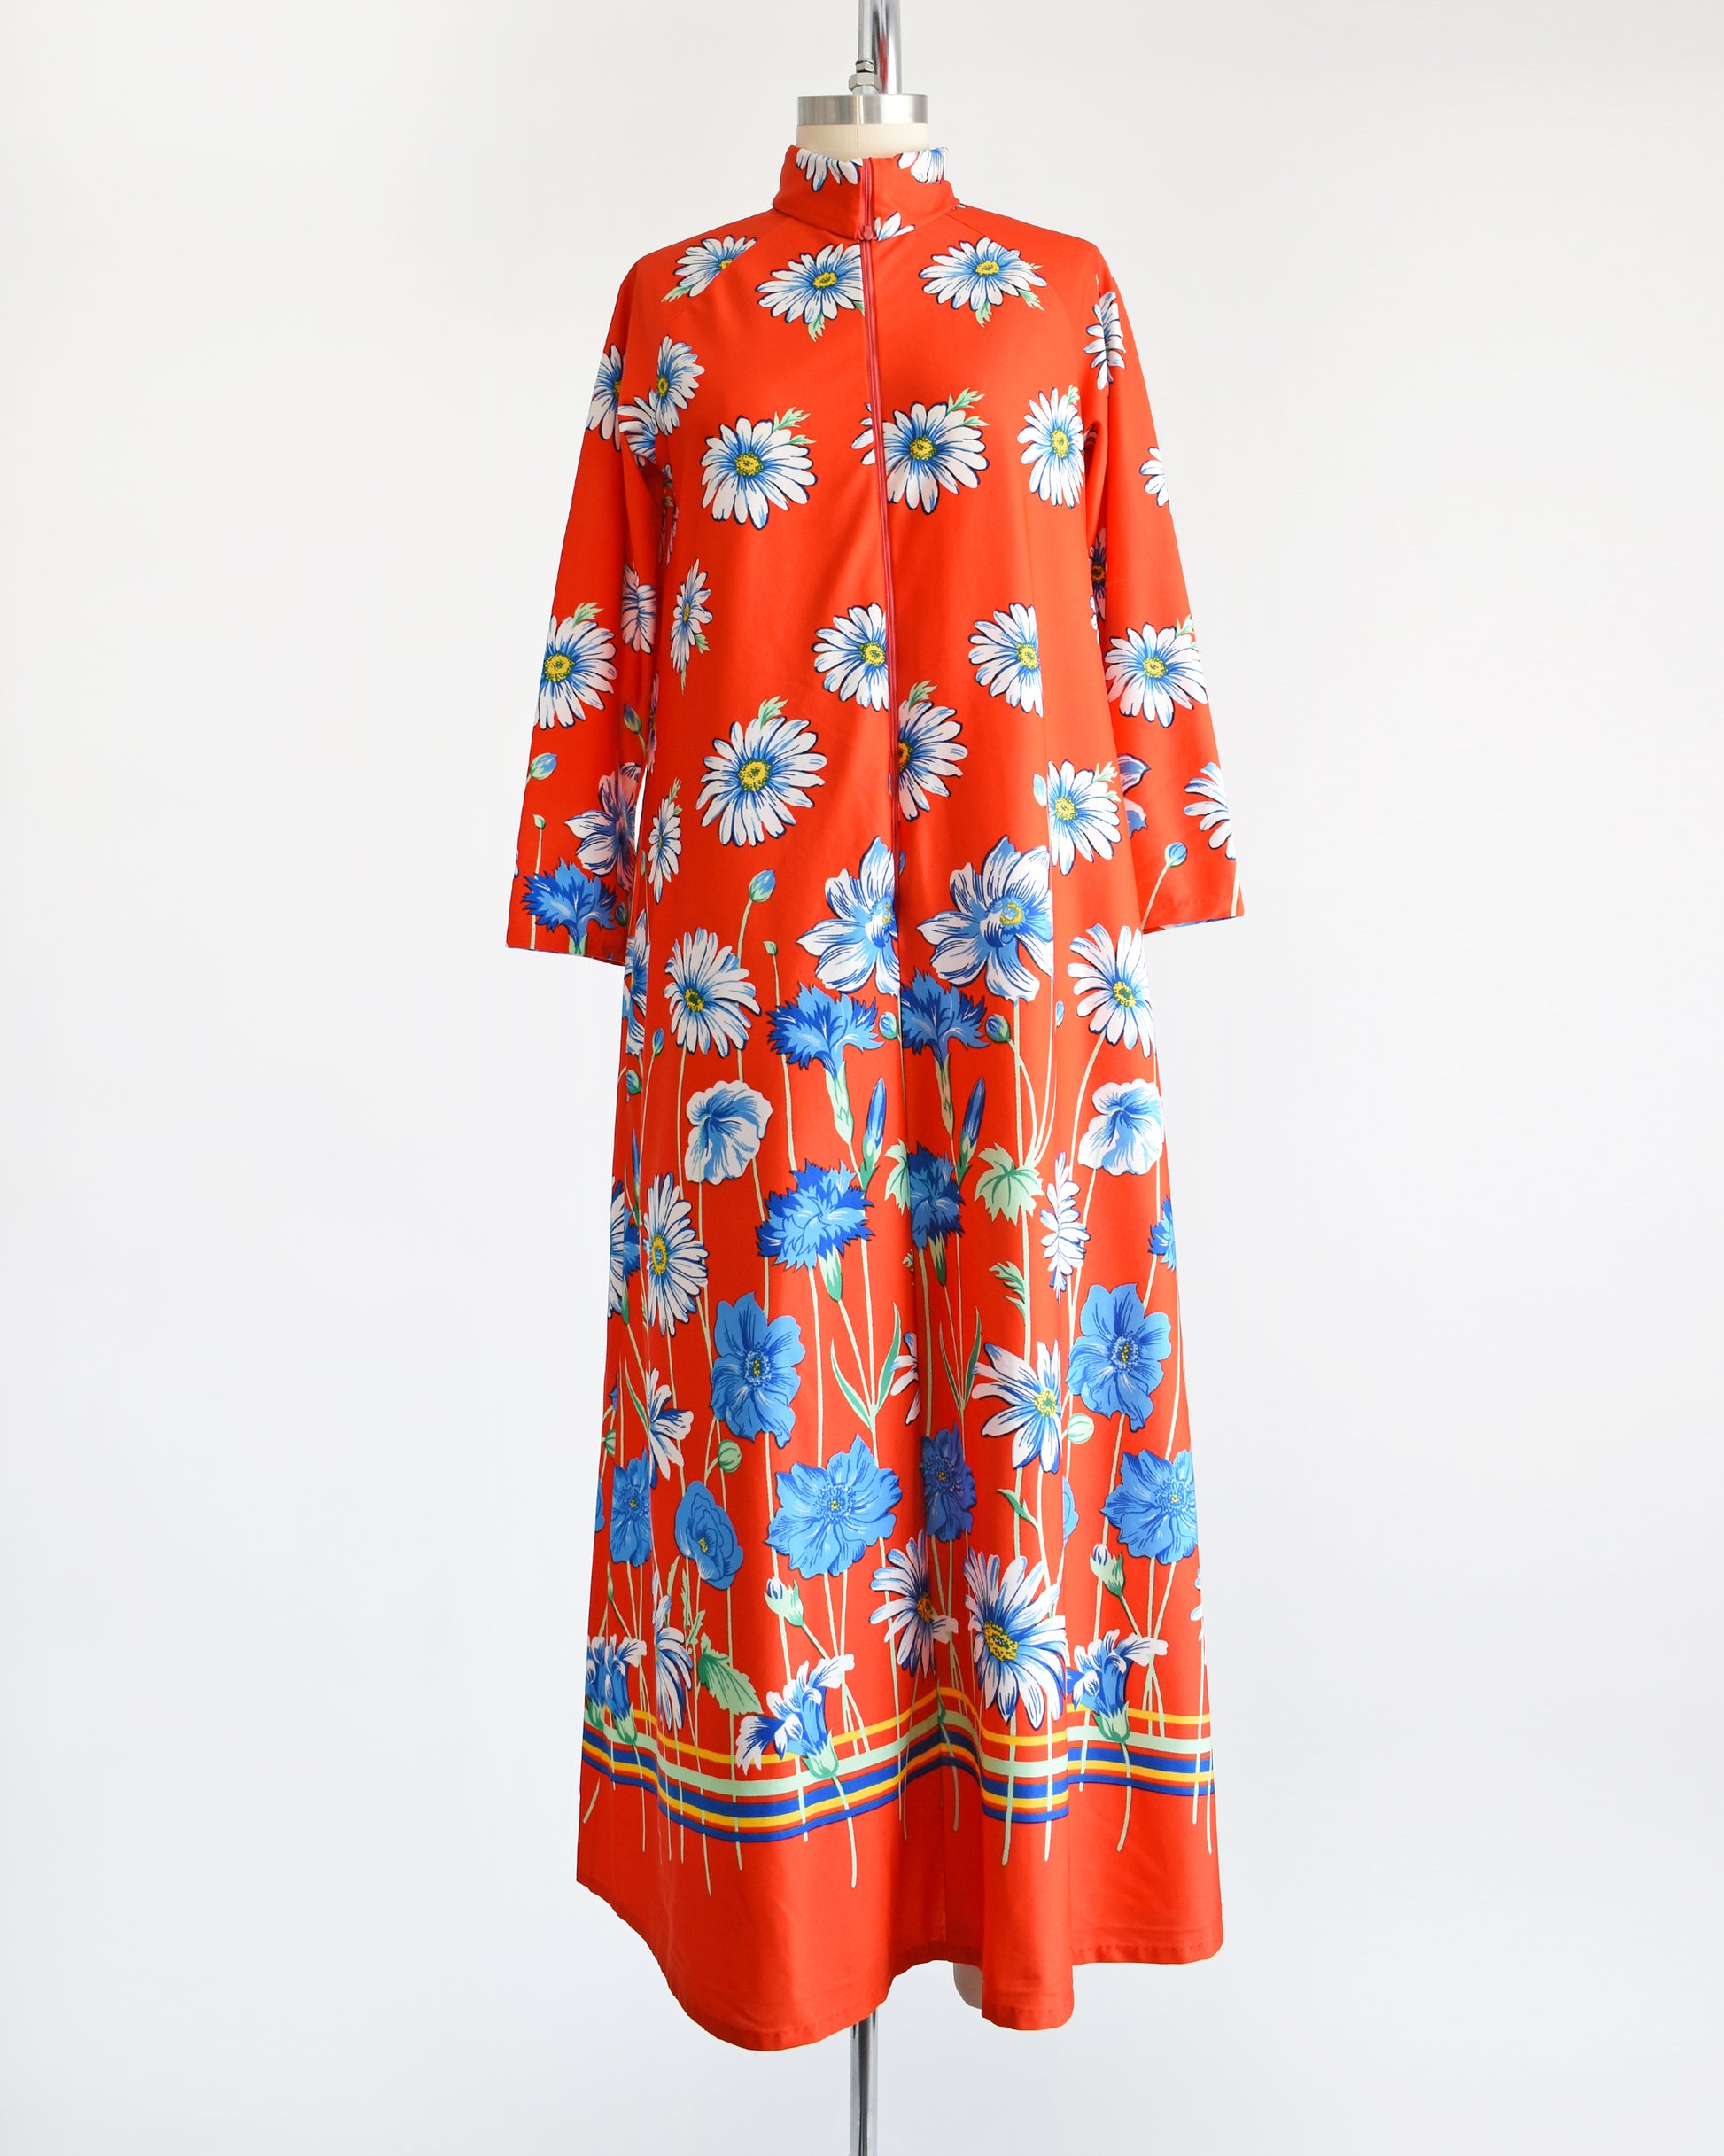 A vintage 1970s red floral lounge dress with a zipper down the front. 